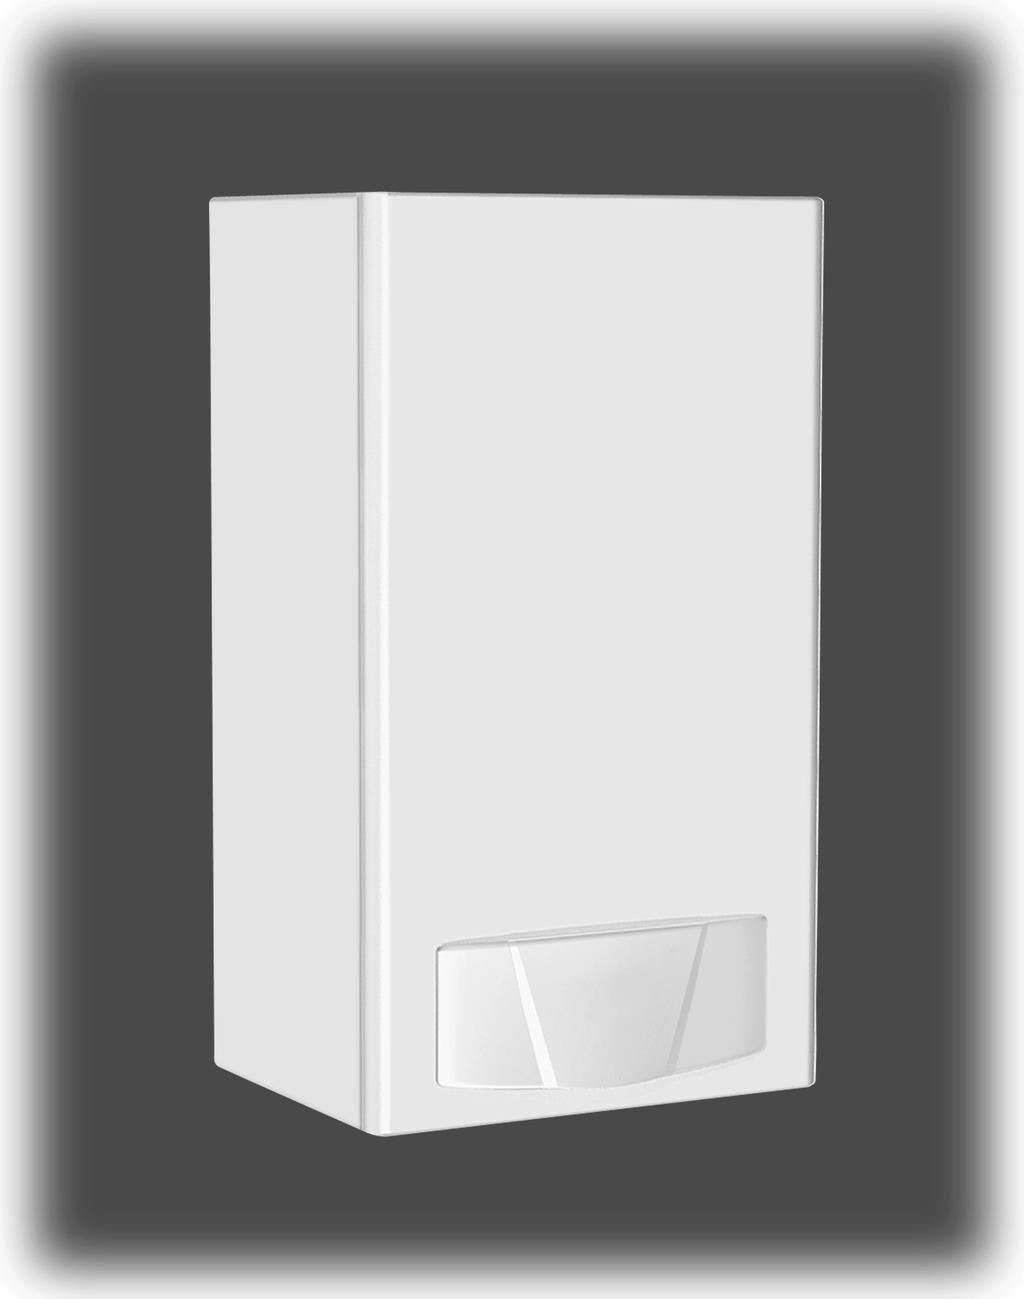 Wall hung combination boilers